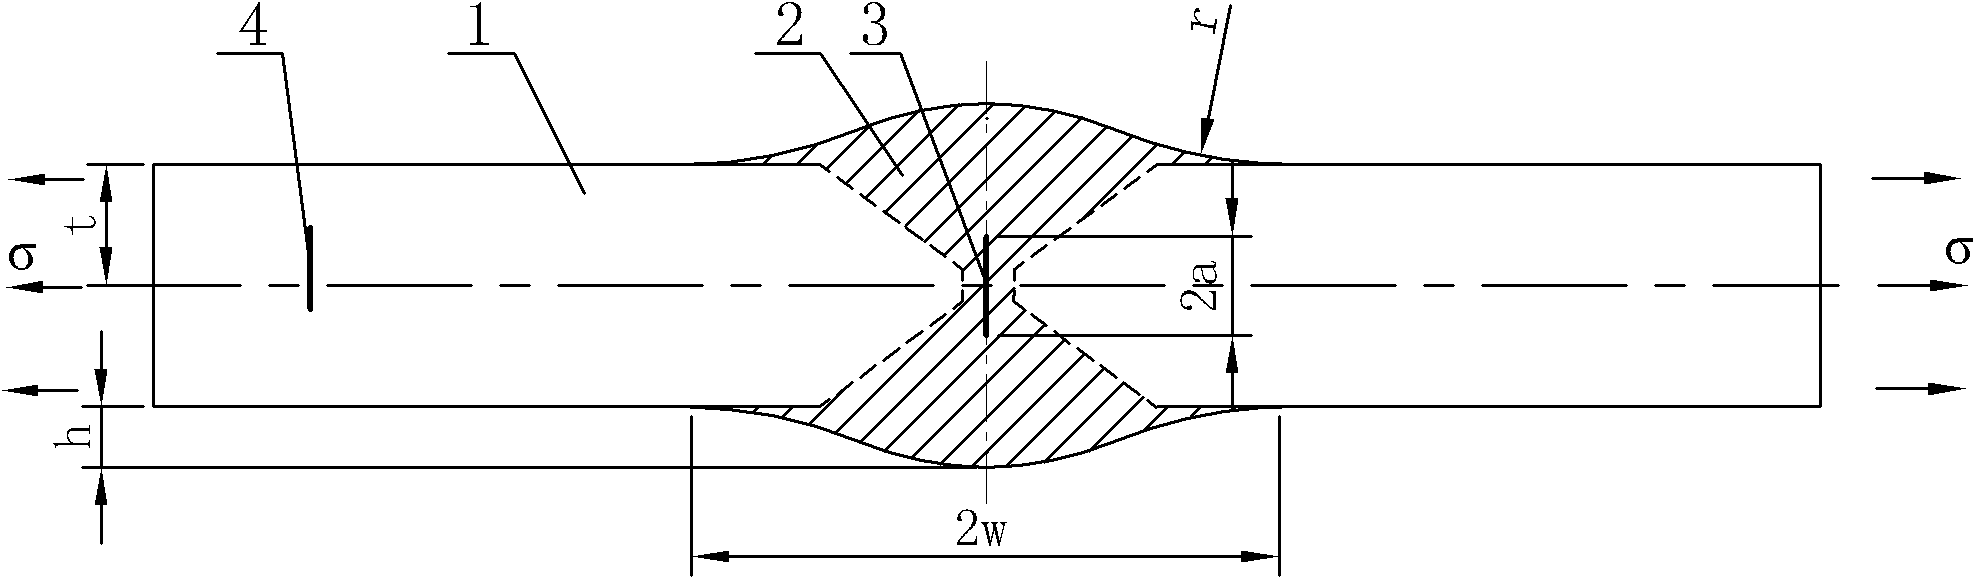 Designing method for realizing equal load-carrying of tension-loaded butt joint with central crack on welding line, and application of K factor